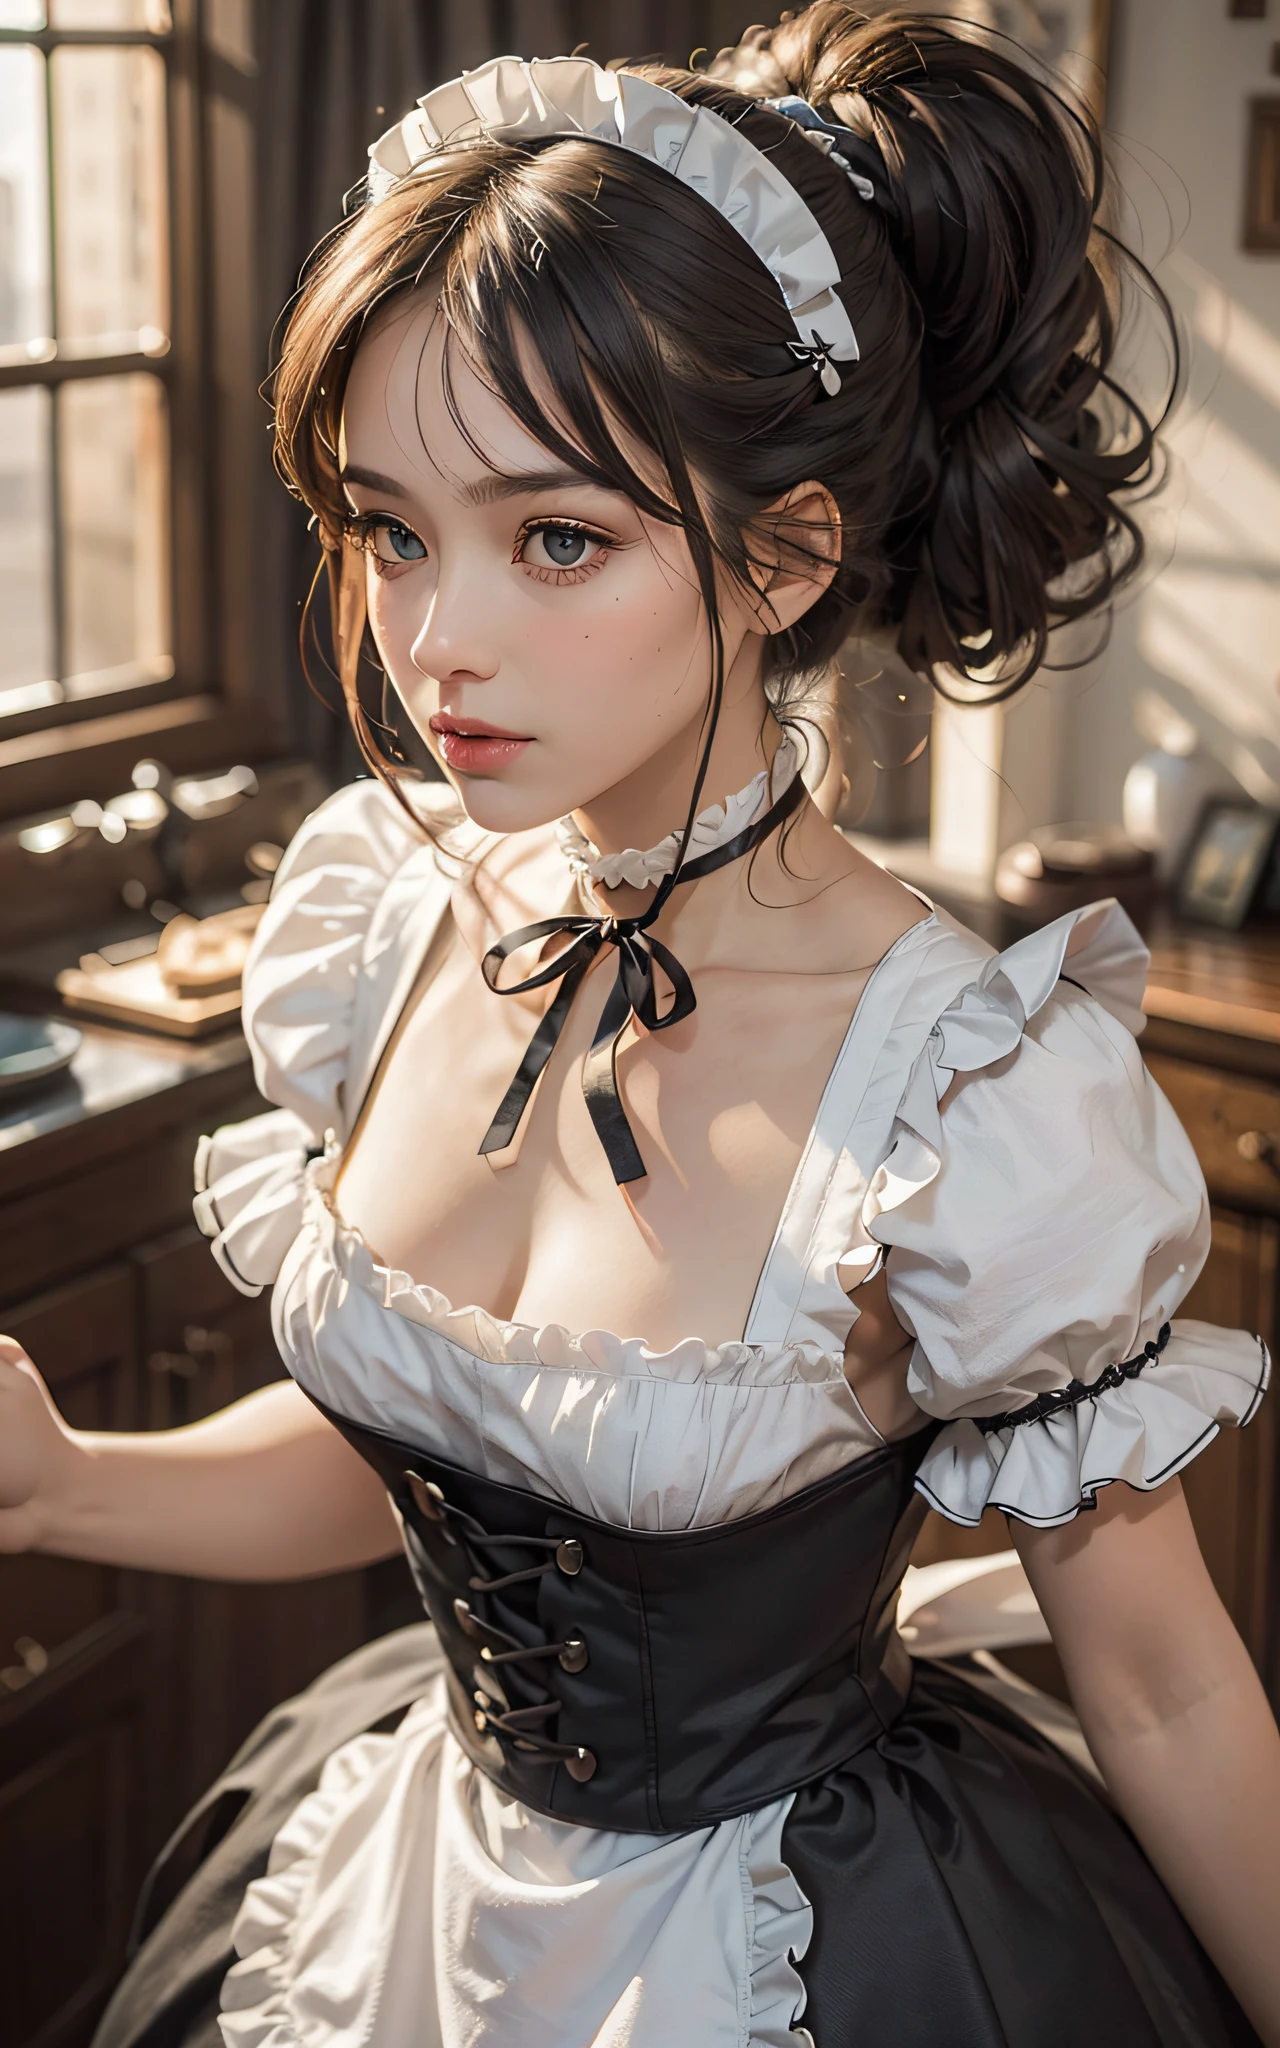 (Raw foto:1.2), ​masterpiece, At 8K, hight resolution, (Photorealsitic:1.4), cowboyshot, extremely detailed eye and face, beatiful detailed eyes, Realistic face, hight resolution, ighly detailed, top-quality, ​masterpiece, ighly detailed, magnifica, mansion, top-quality, poneyTail, (Mole:0.5), a 20 yo woman, (ssmile:0.5), Head dress, a black ribbon, puff sleeves, collars, a choker, Apron with detailed ruffles, Black Maid Costume,  half updo, 8K, full back panties